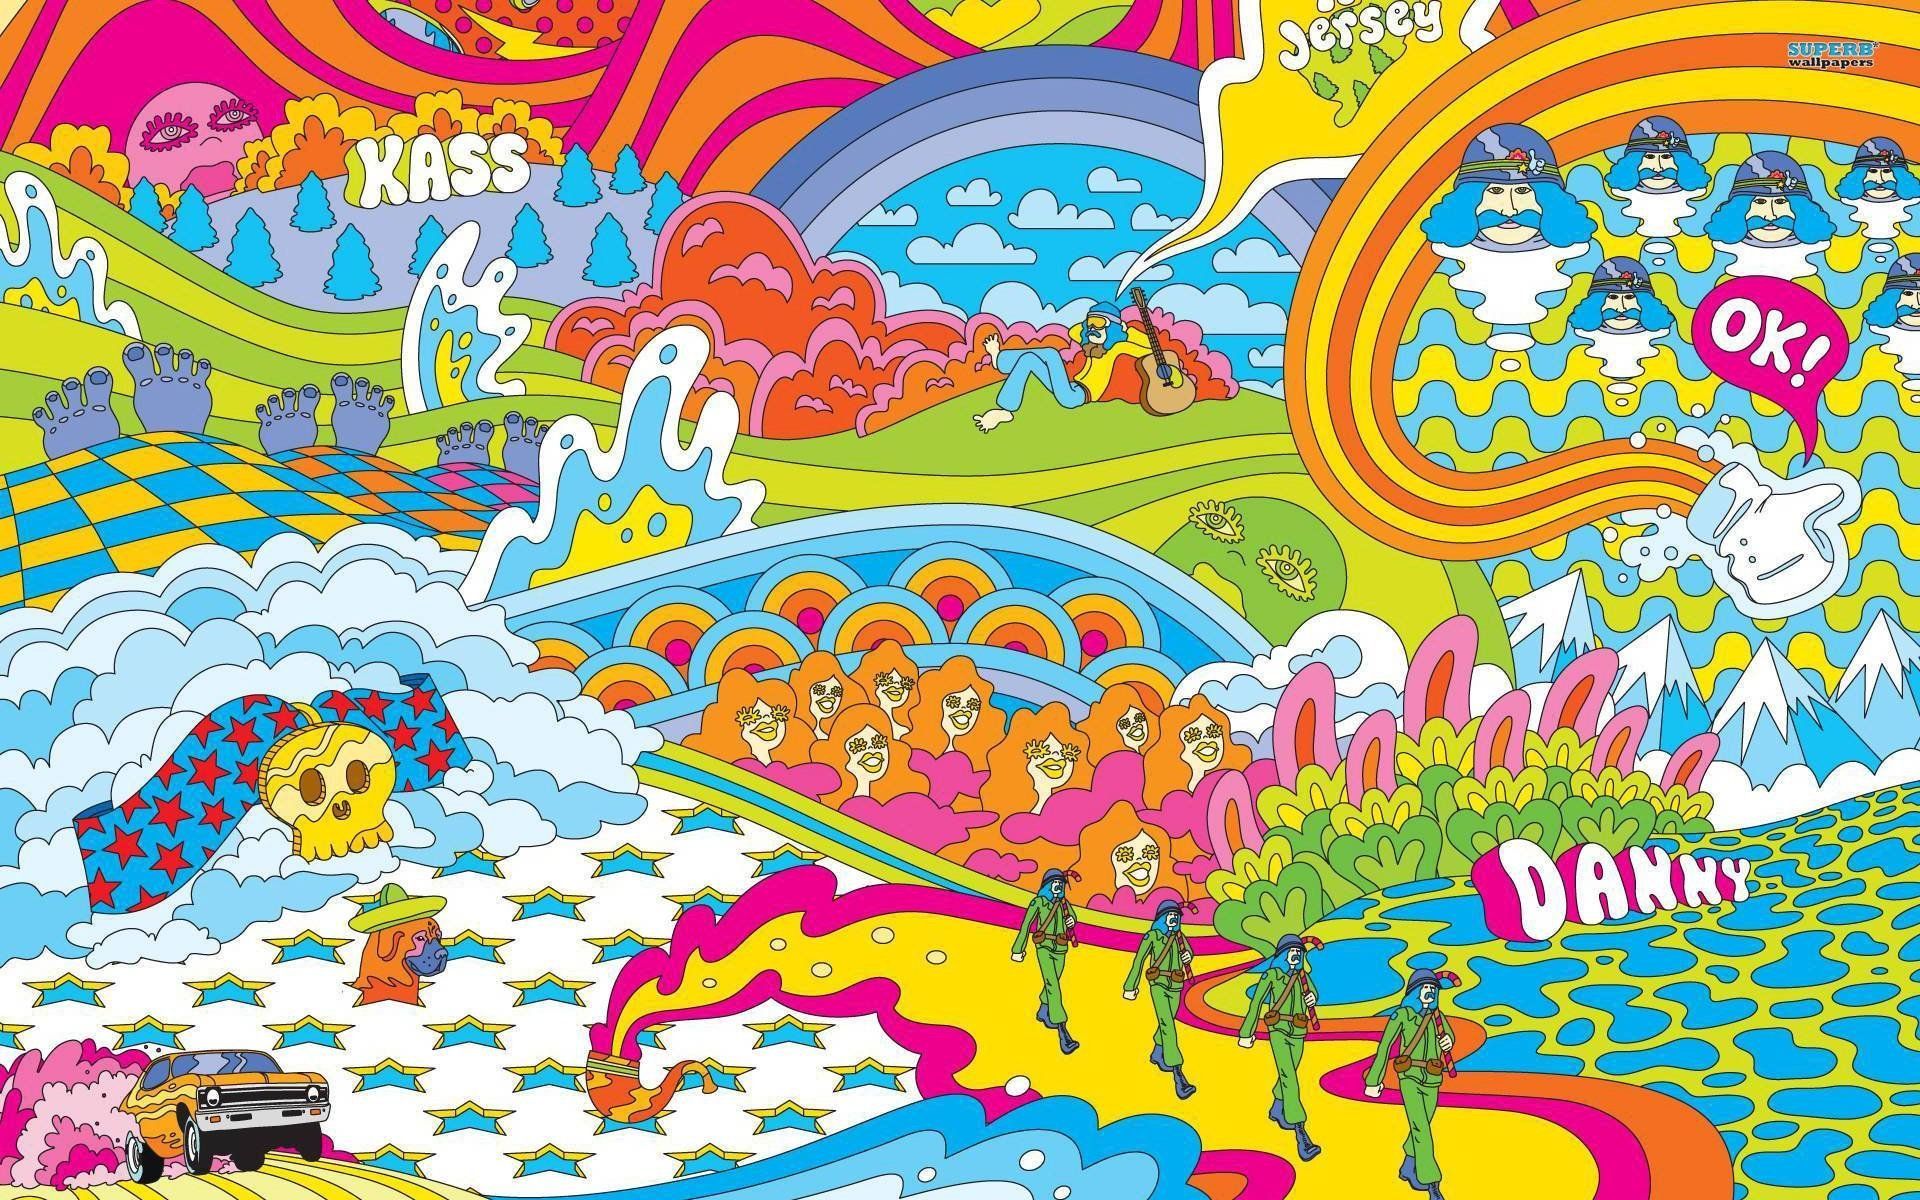 Psychedelic art is a form of art that is characterized by the use of vivid colors, distorted geometric shapes, and other optical illusions. - 70s, 60s, trippy